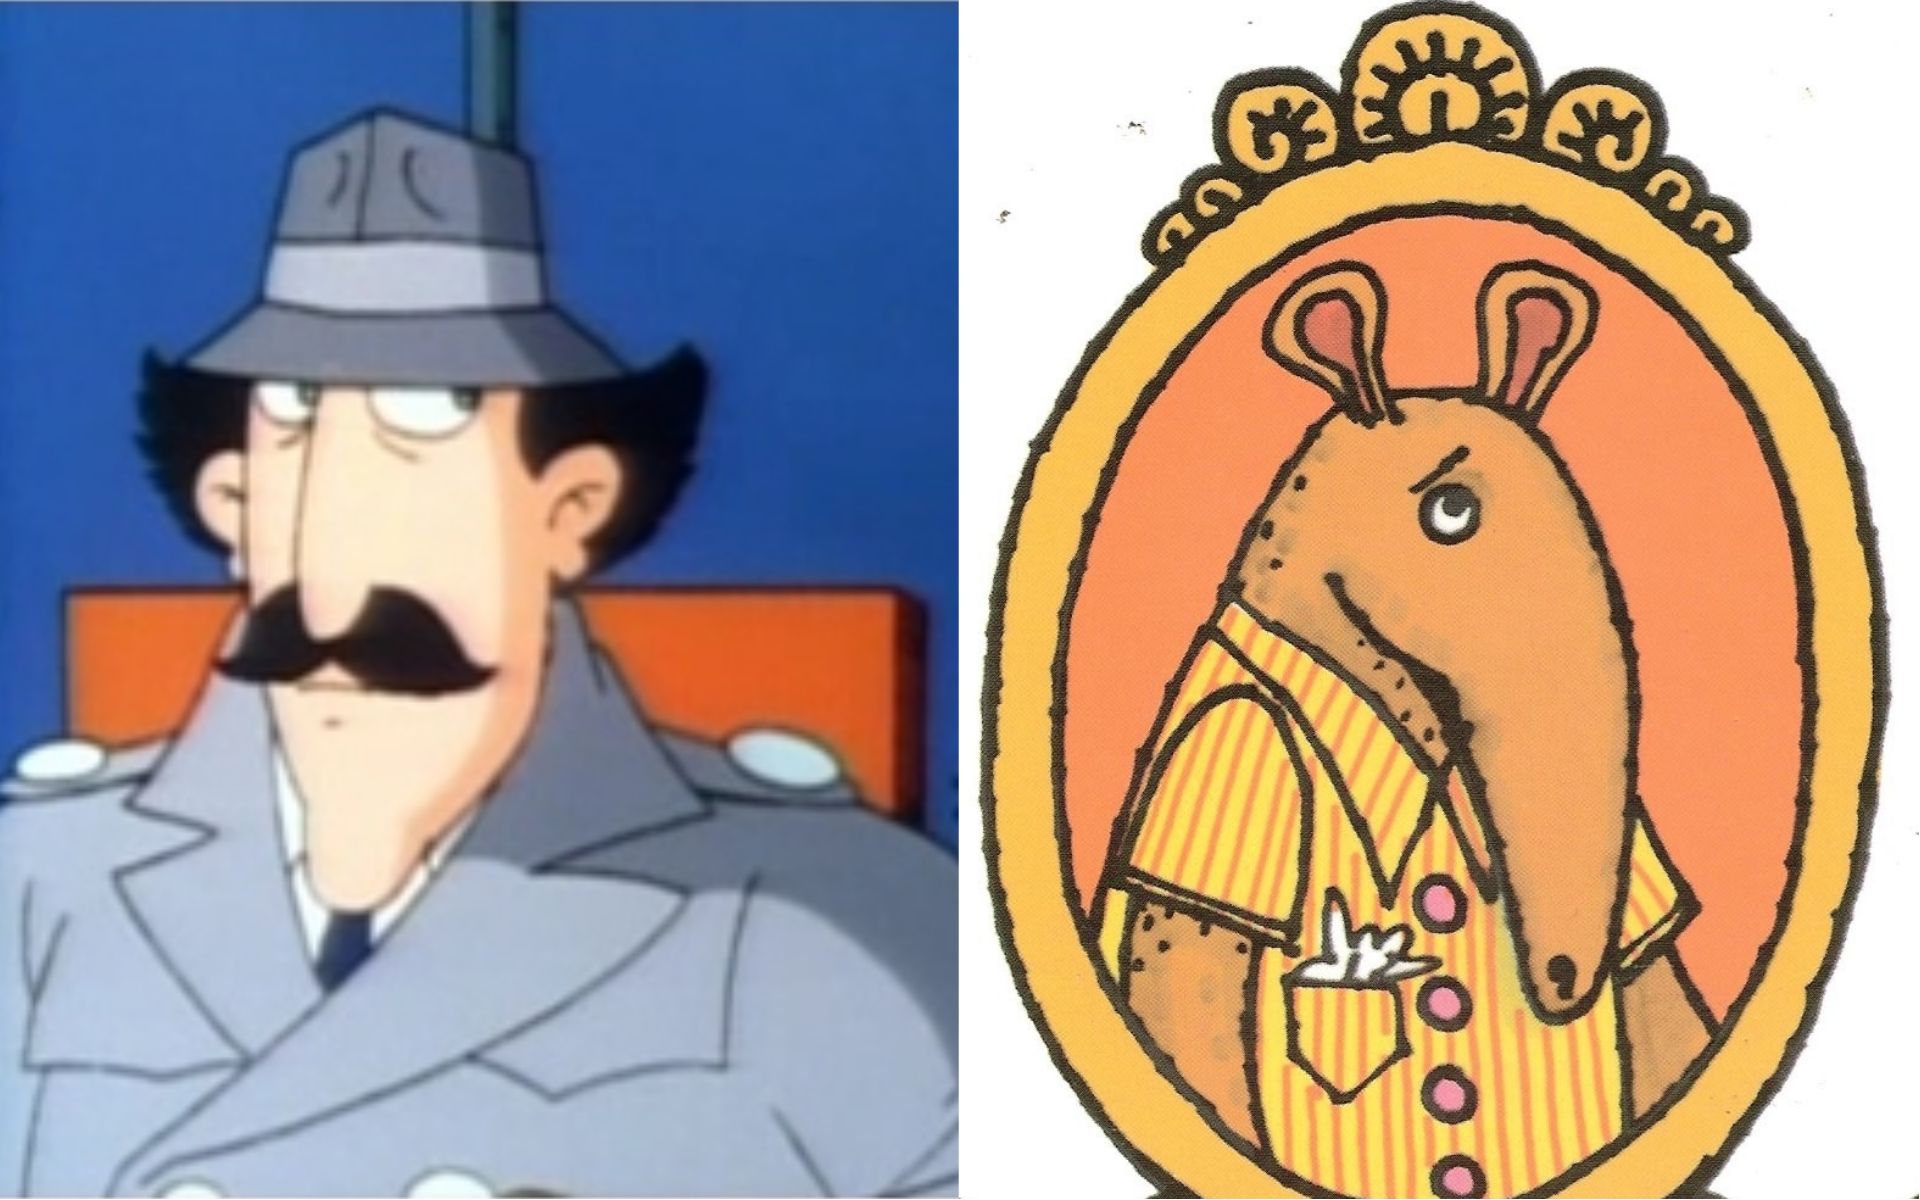 Changing Appearances of Inspector Gadget and Arthur